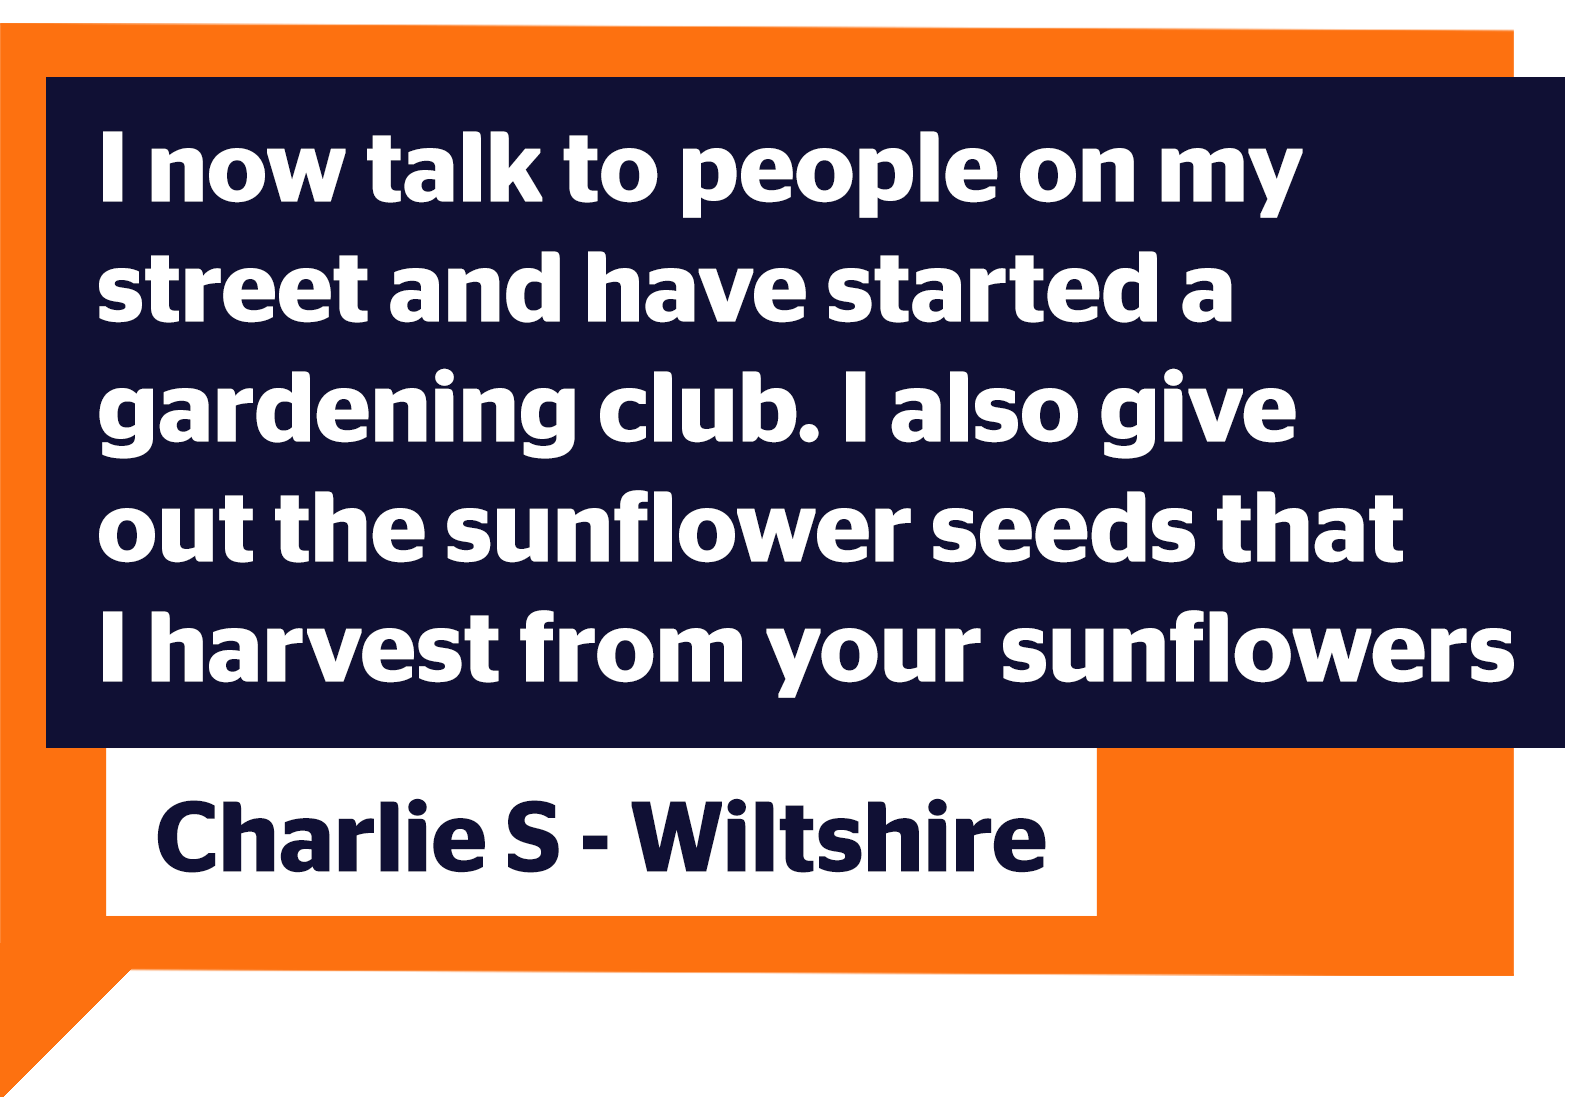 I now talk to people on my street and have started a gardening club. I also give out the sunflower seeds that I harvest from your sunflowers. Charlie S, Wiltshire